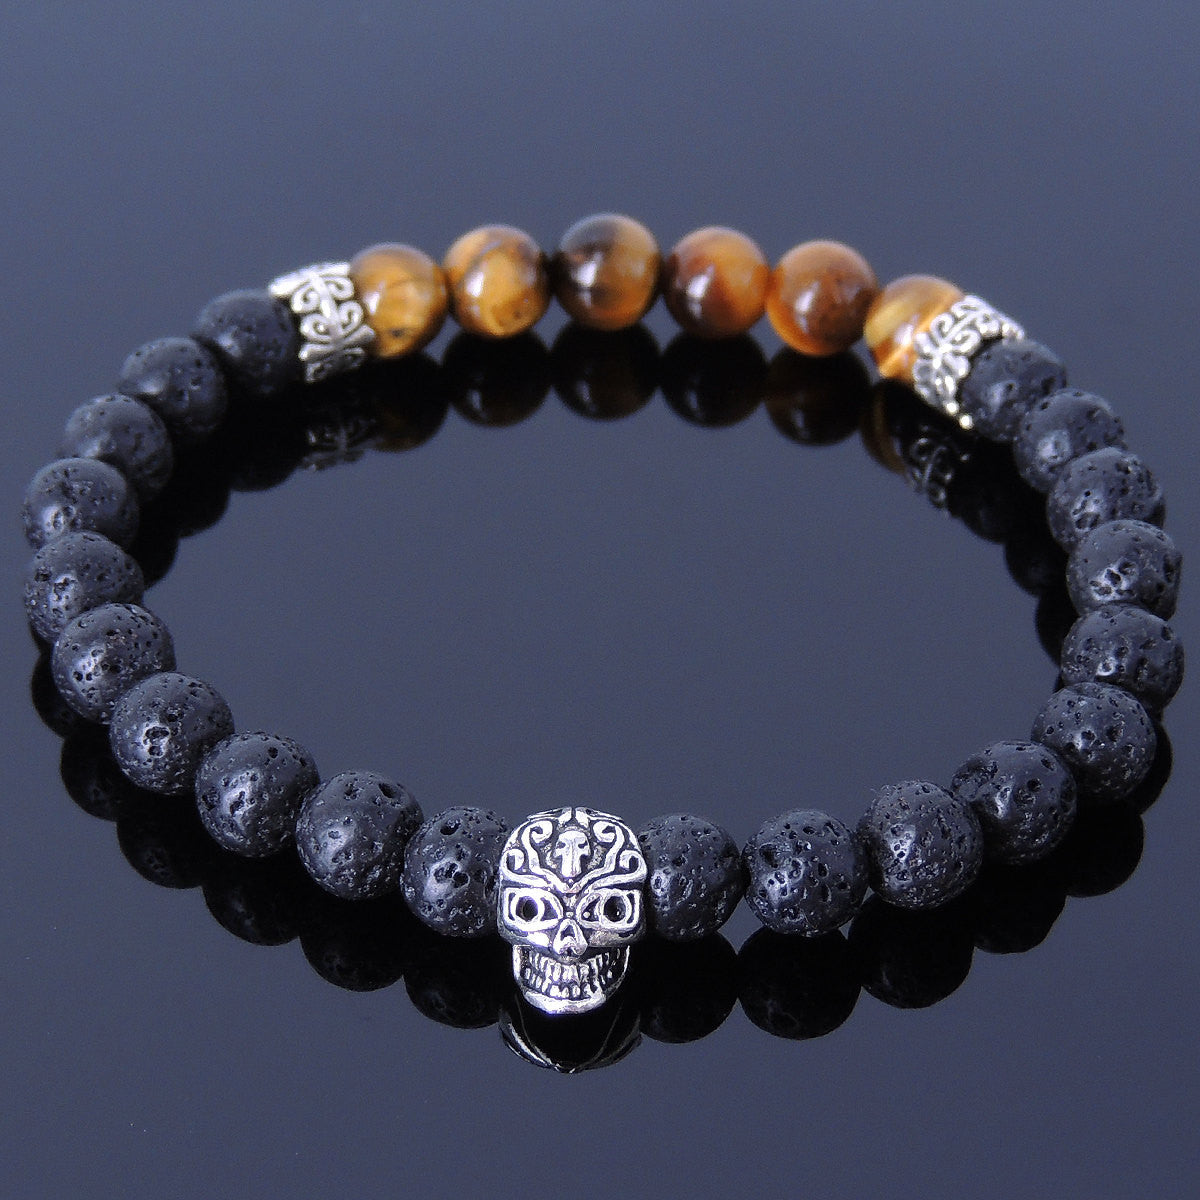 6mm Brown Tiger Eye & Lava Rock Healing Gemstone Bracelet with S925 Sterling Silver Day of the Dead Skull Bead & Cross Spacers - Handmade by Gem & Silver BR325